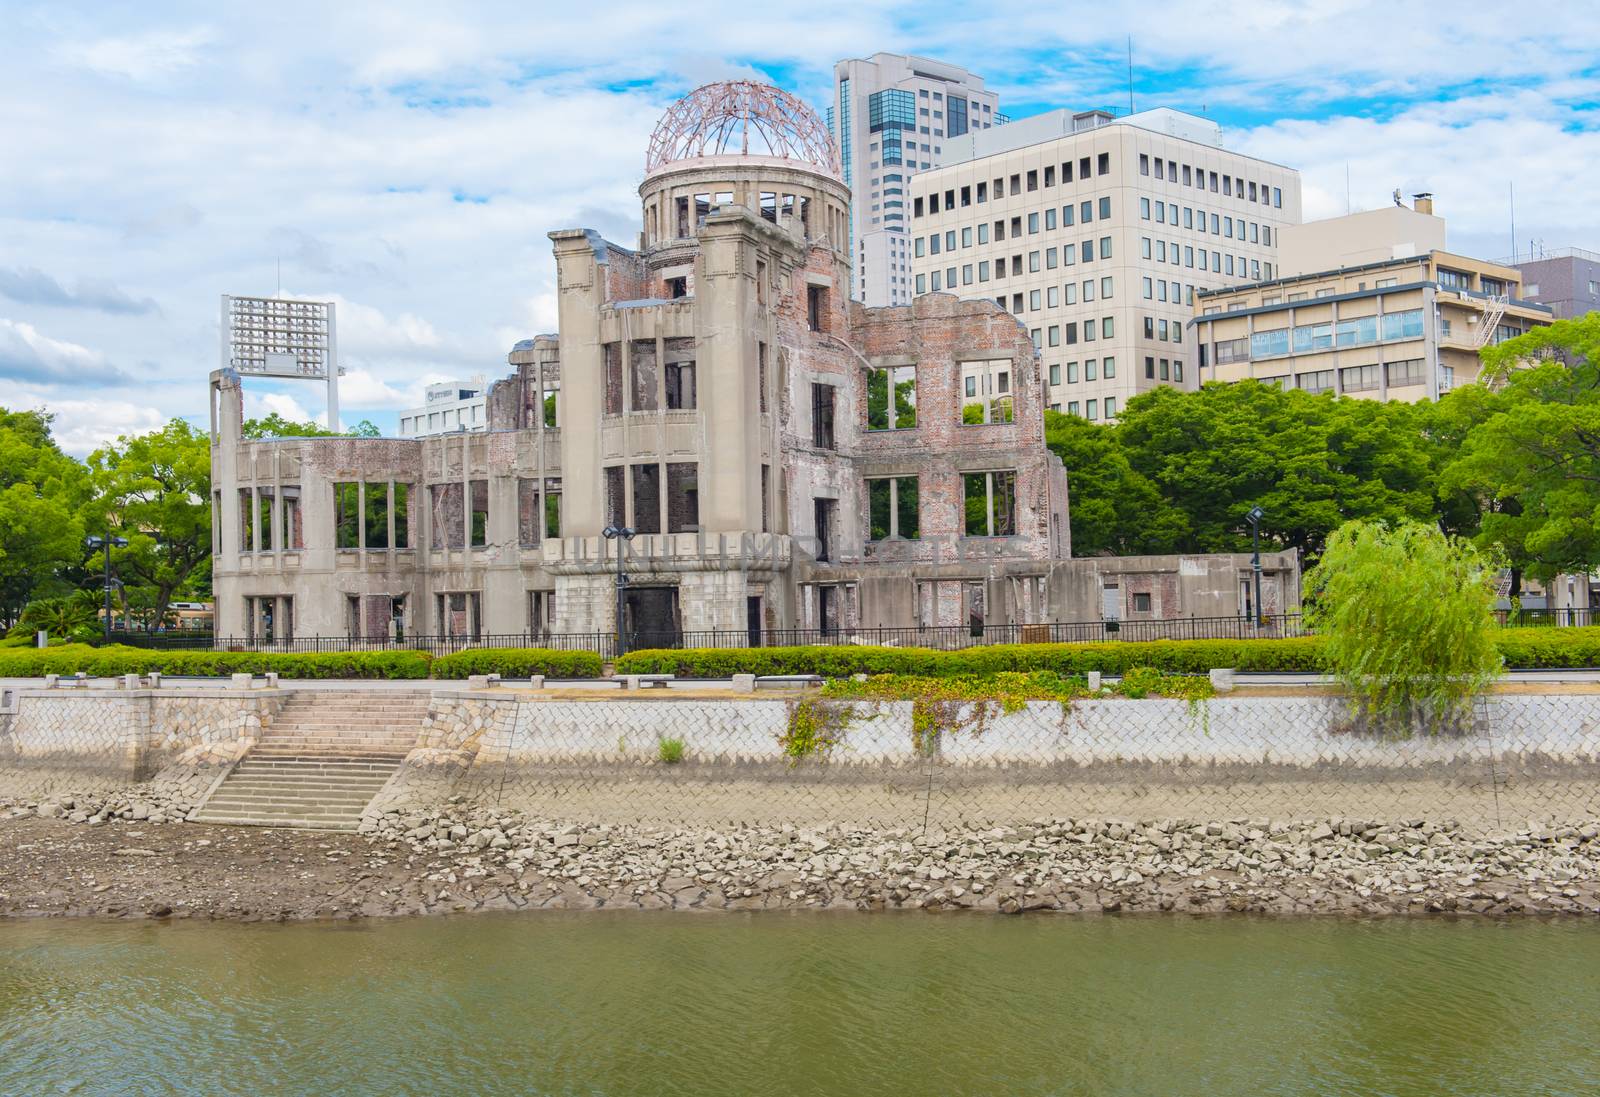 Hiroshima nuclear dome by fyletto